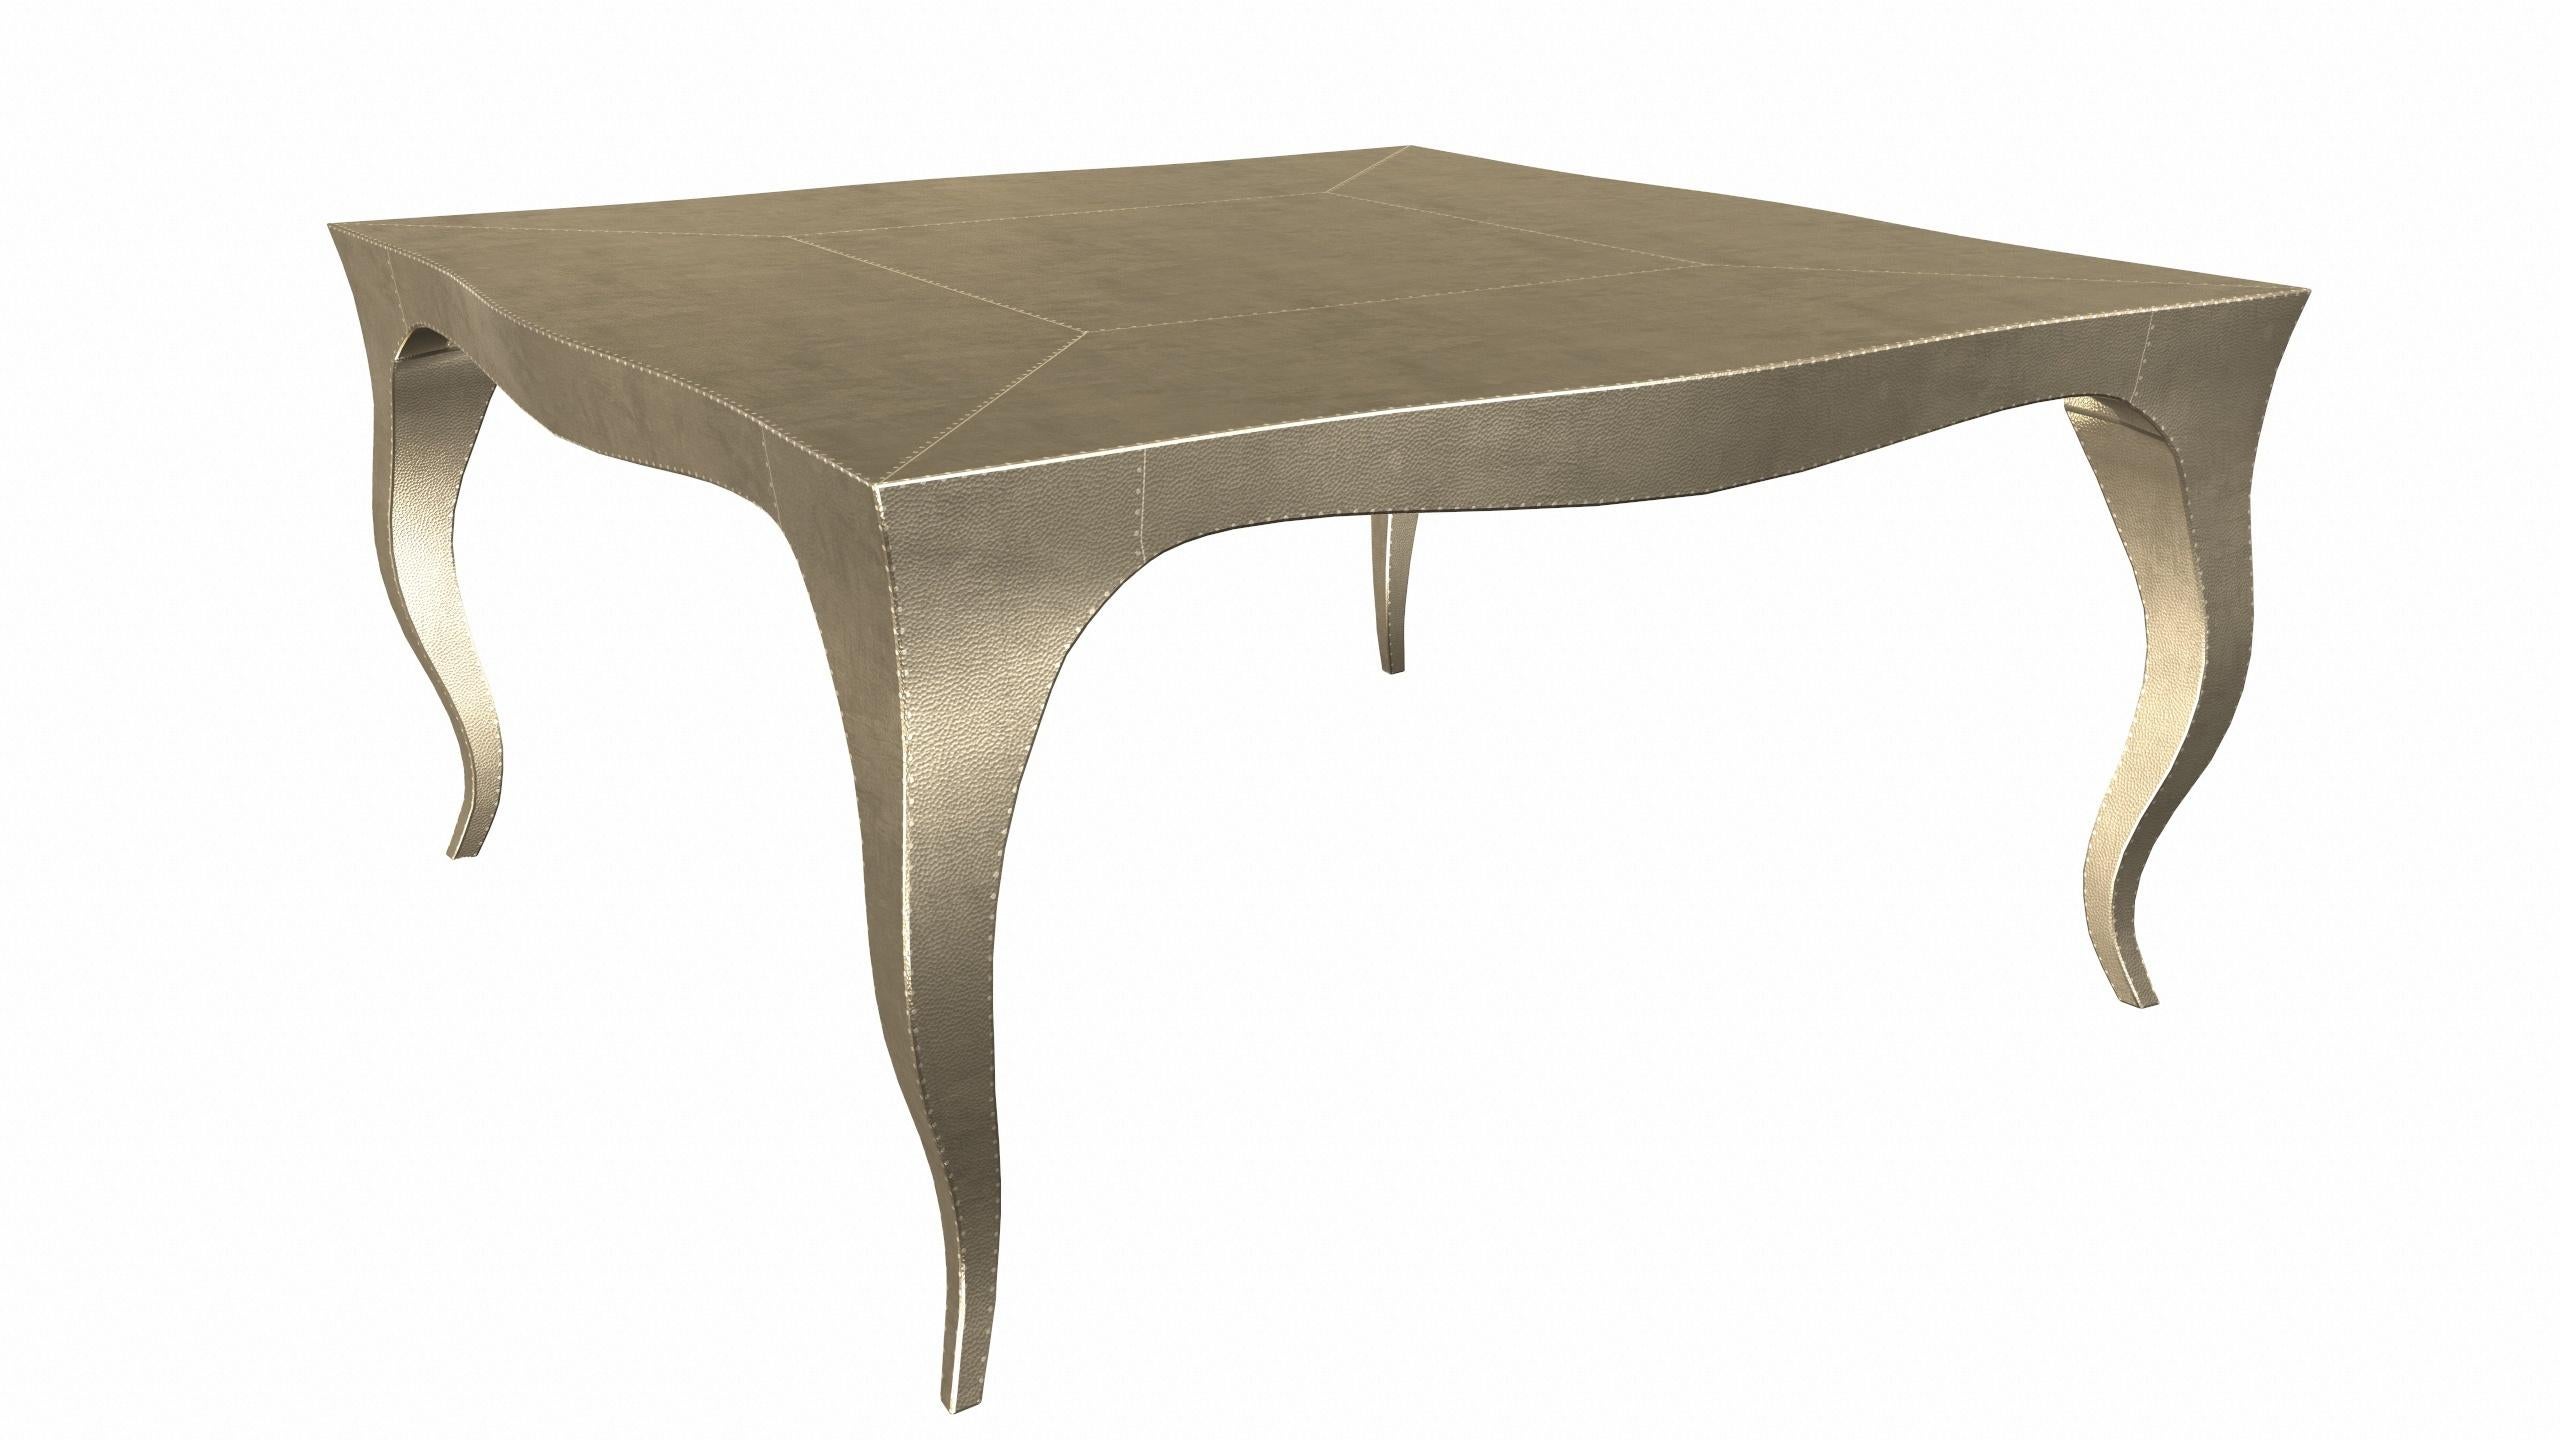 Metal Louise Art Deco Center Tables Mid. Hammered Brass 18.5x18.5x10 inch For Sale